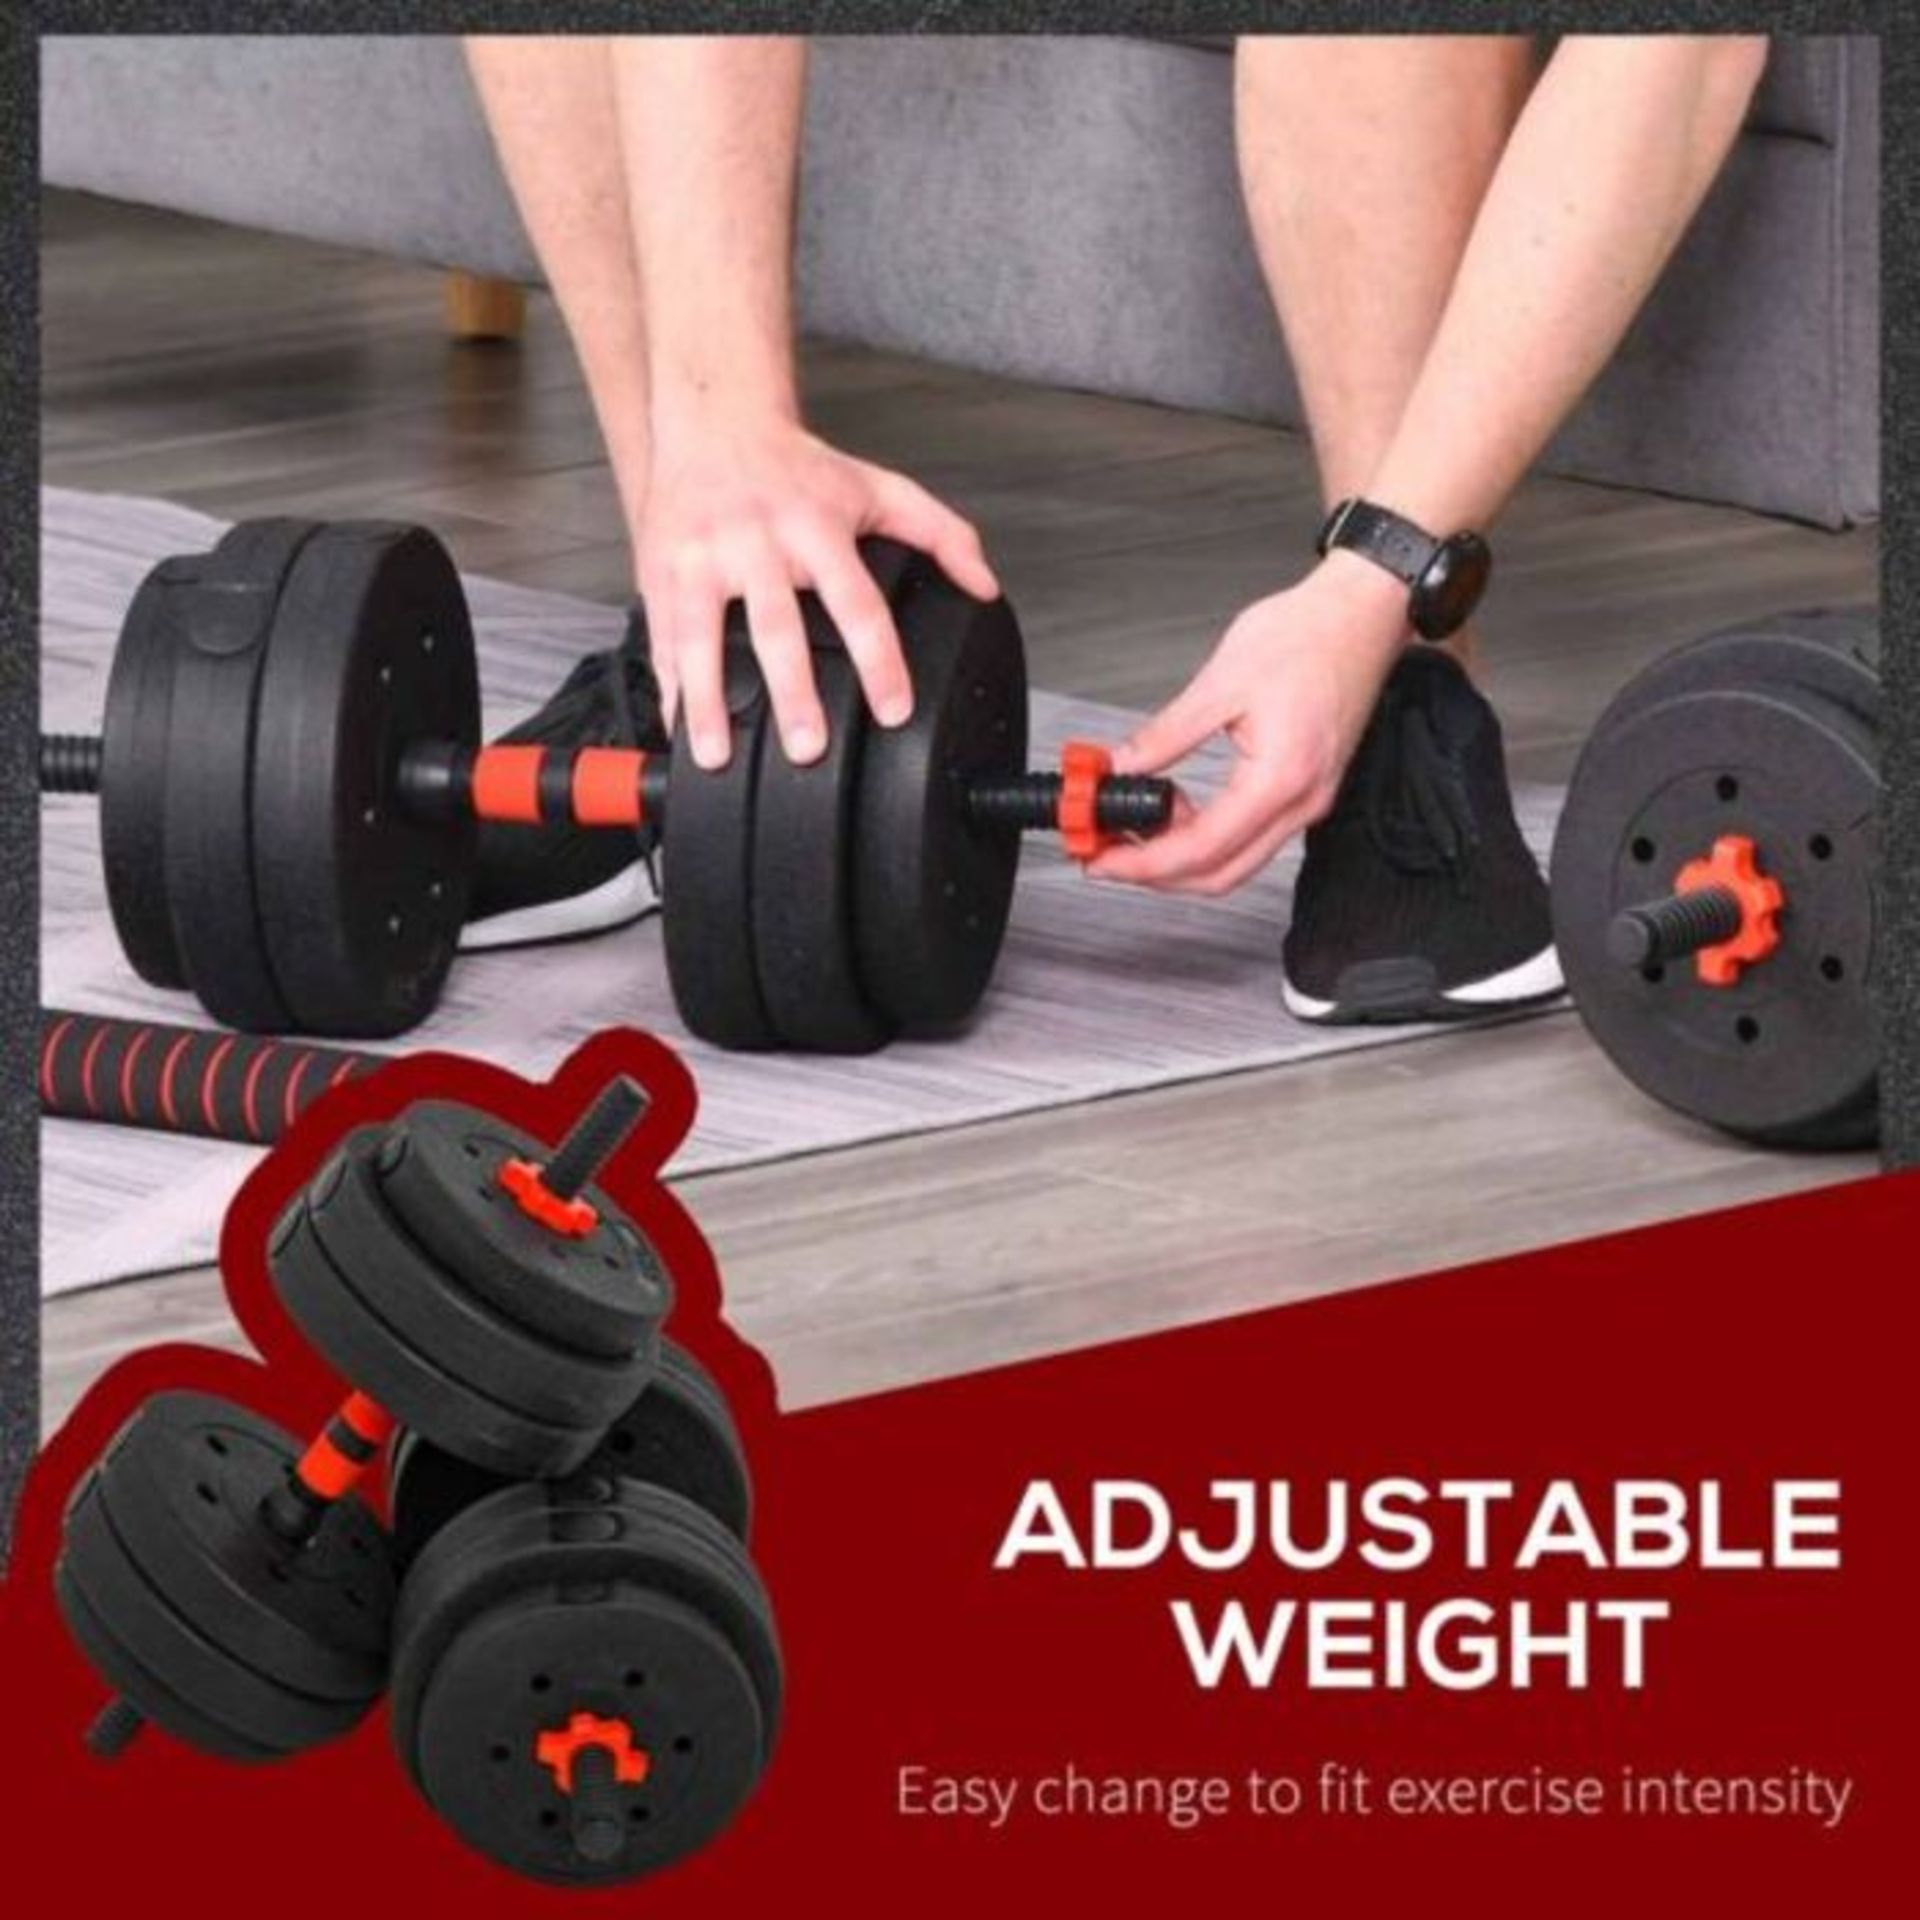 Hom Com 2 in1 Barbell/Dumb bell 30kg weight set, new and boxed, Similar sets retail at around œ50 - Image 2 of 4